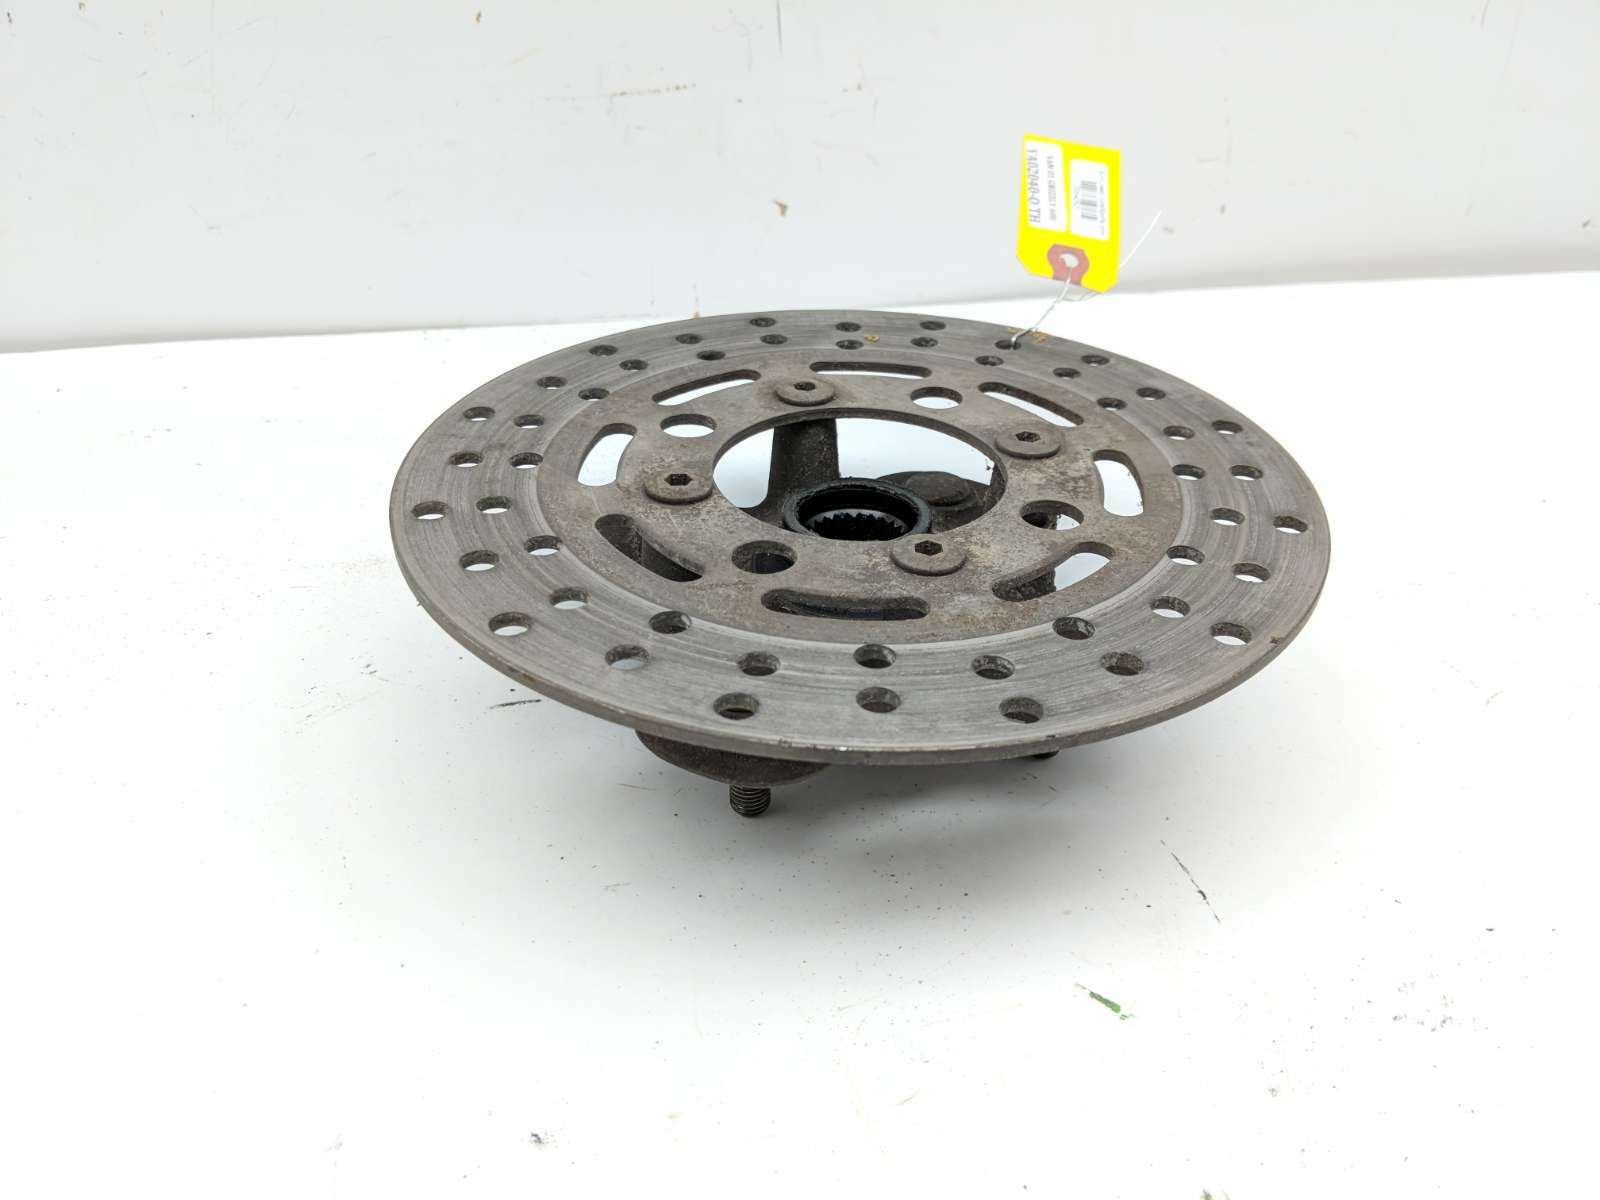 01 Yamaha Grizzly 600 Front Left Wheel Hub with Disc Brake Rotor